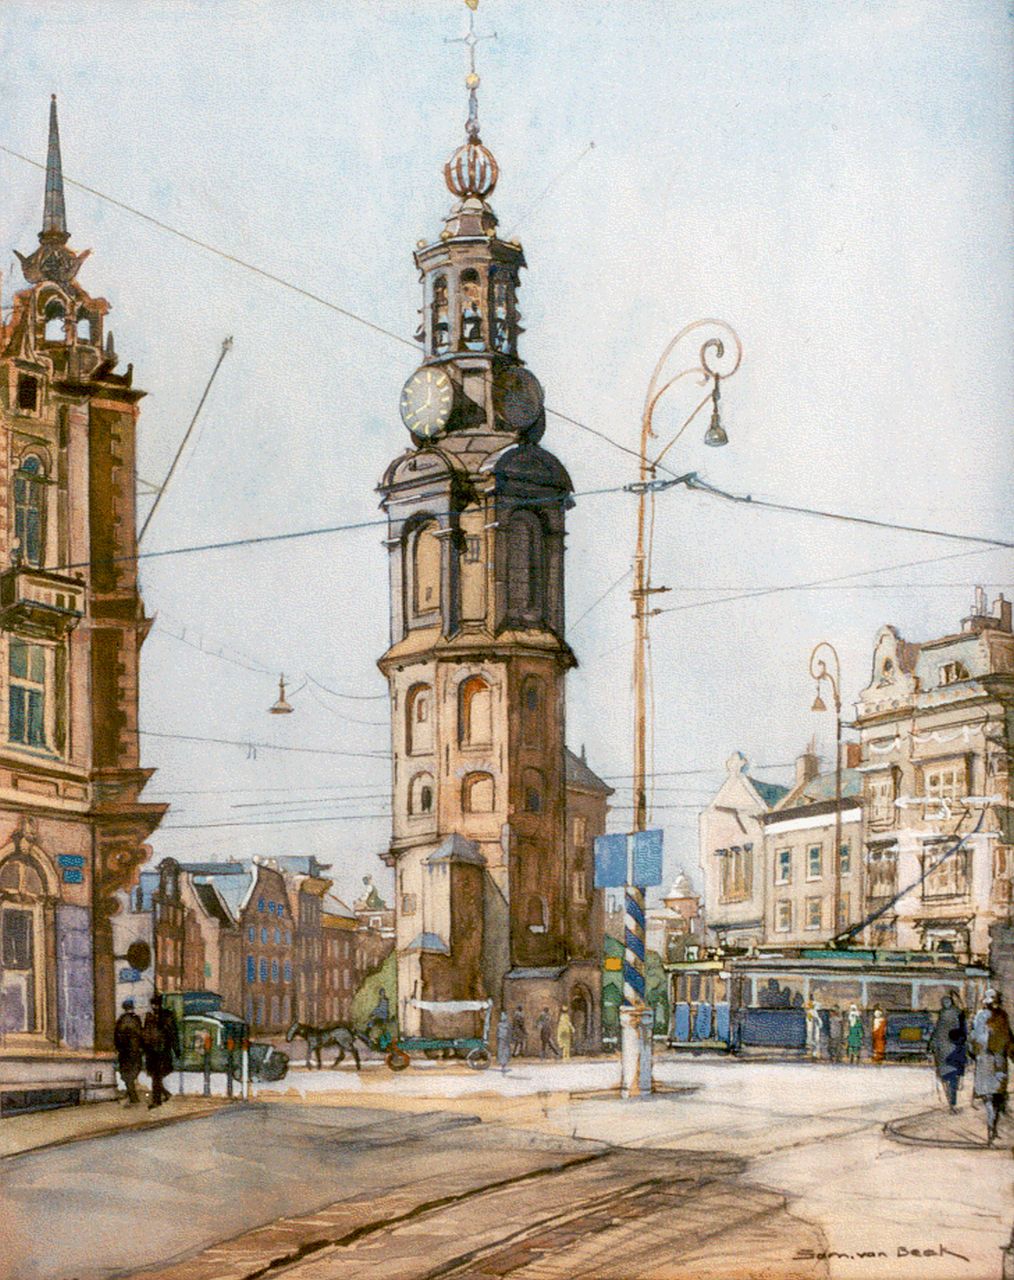 Beek S.J. van | Samuel Joseph 'Sam' van Beek, A view of the 'Munttoren, Amsterdam, pencil and watercolour on board 43.0 x 34.4 cm, signed l.r. and dated aug. '43